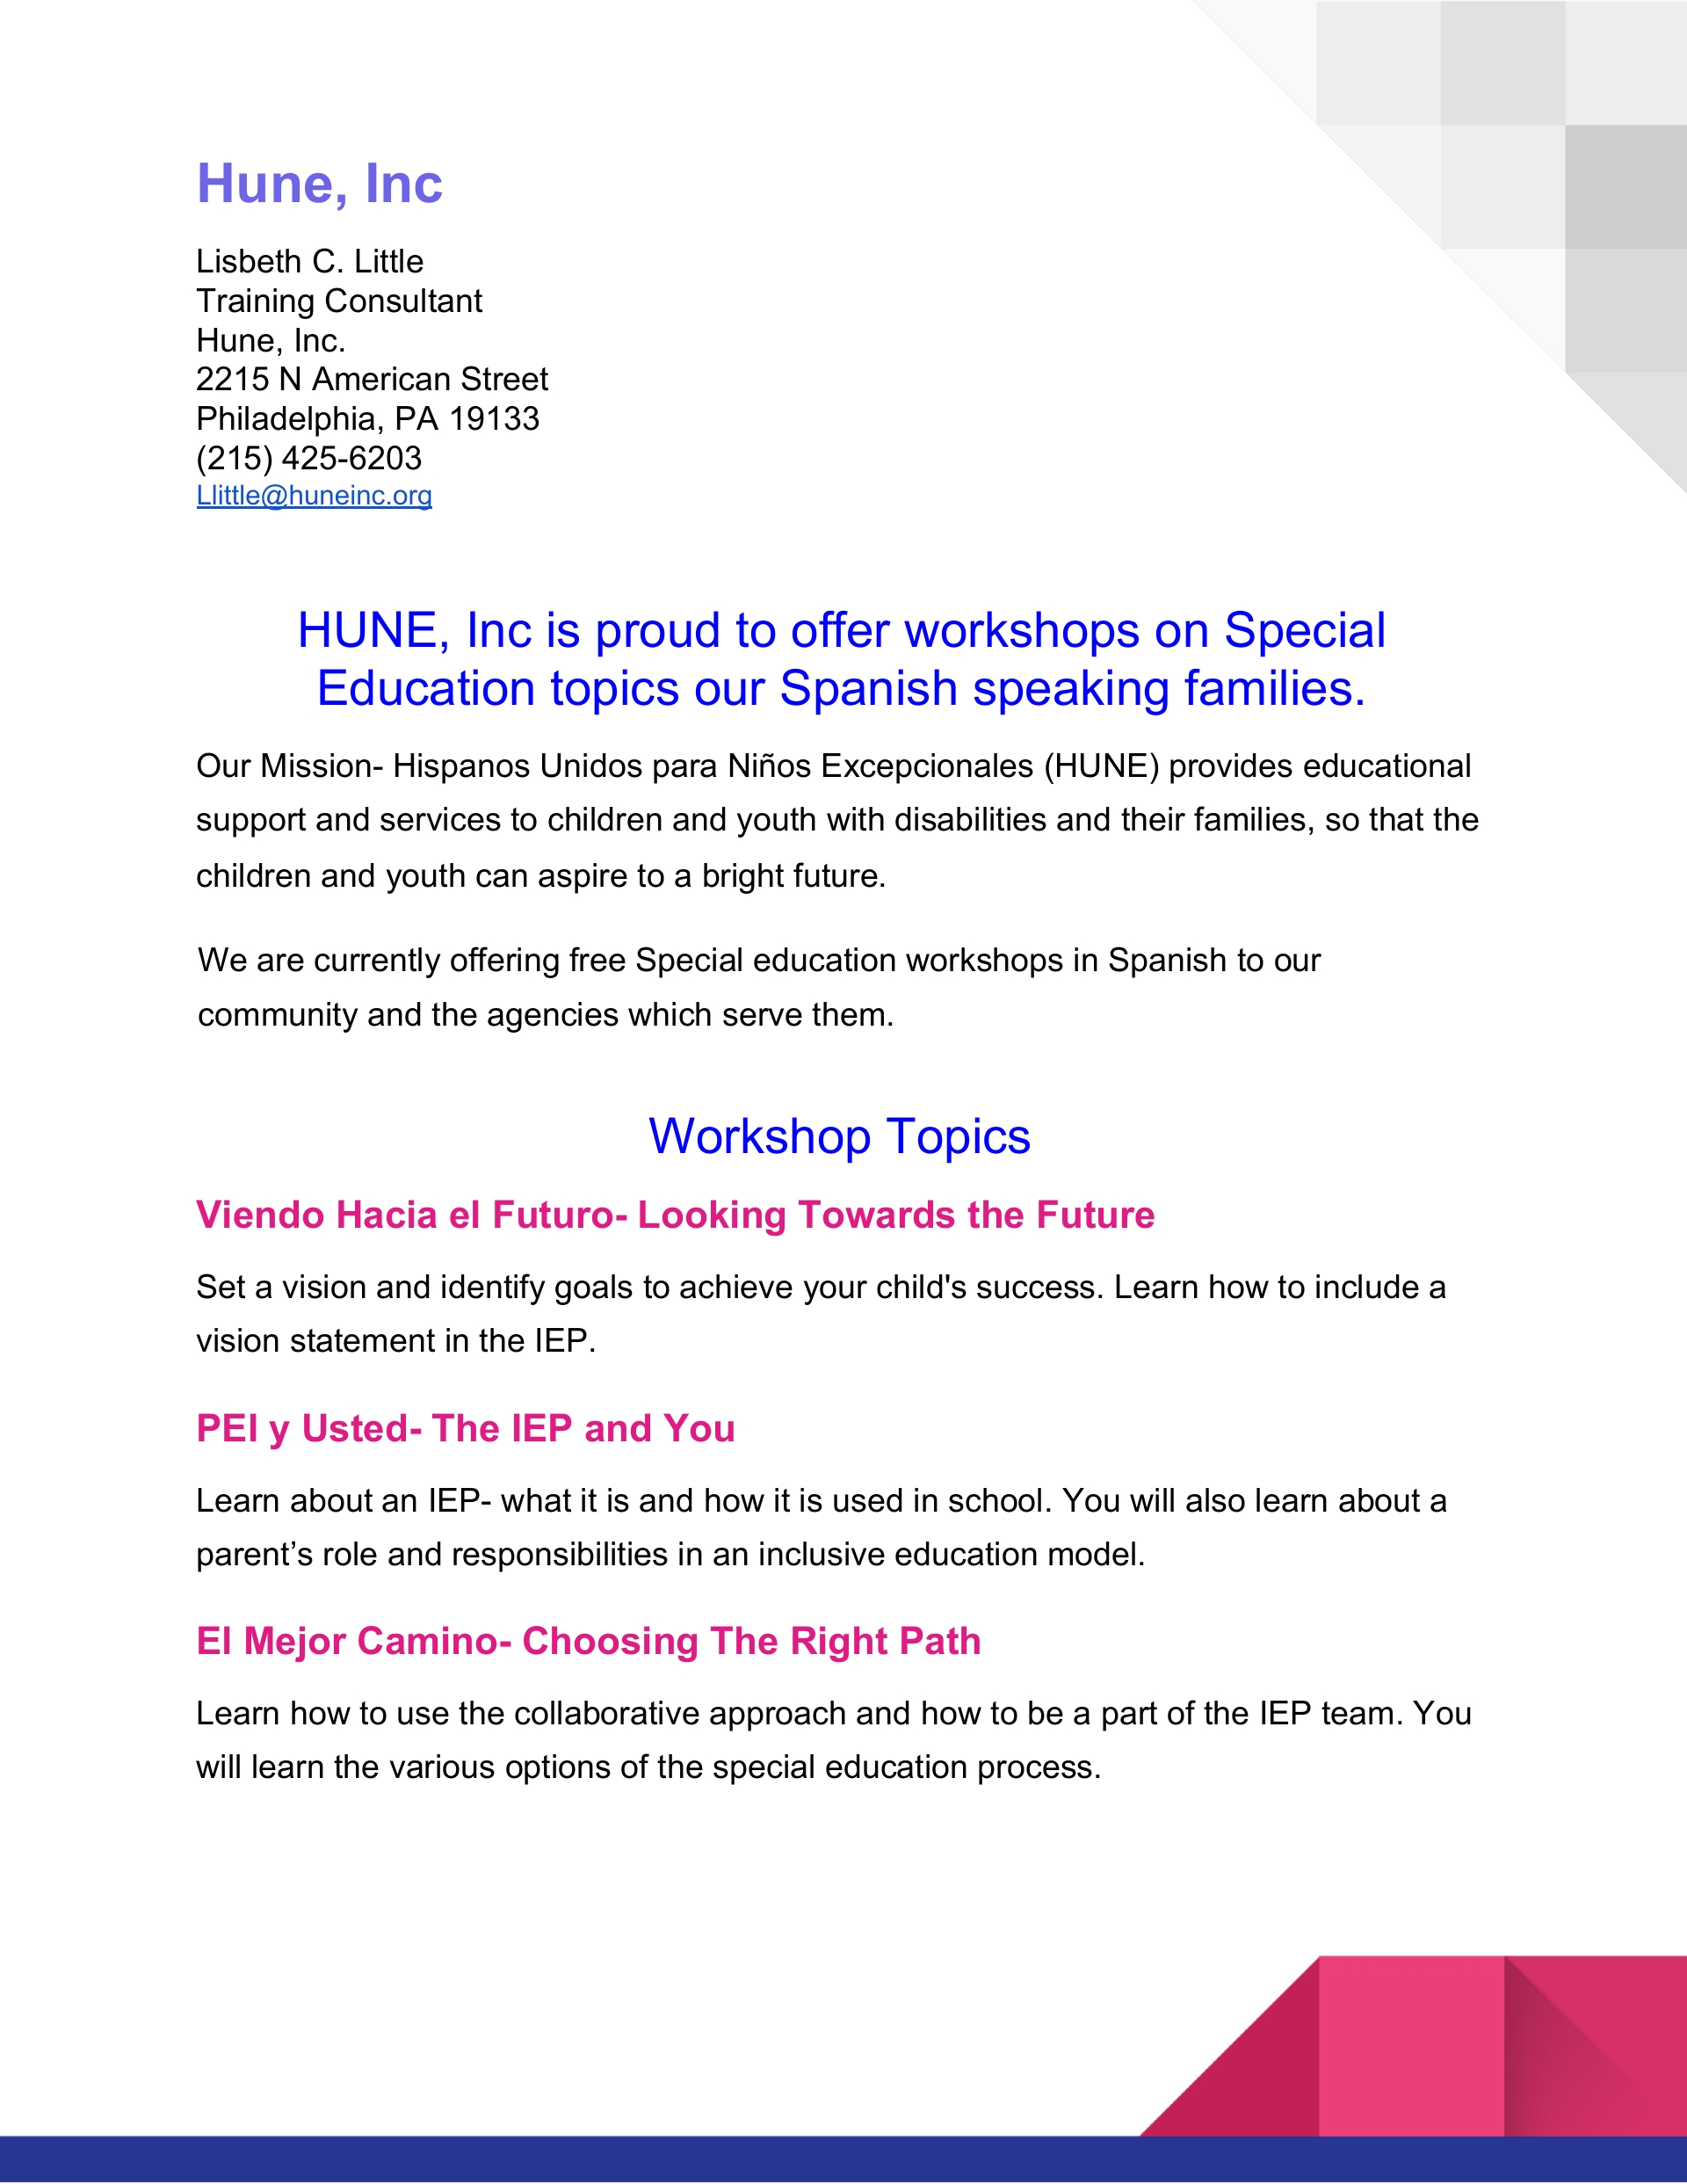 SPECIAL EDUCATION WORKSHOPS IN SPANISH